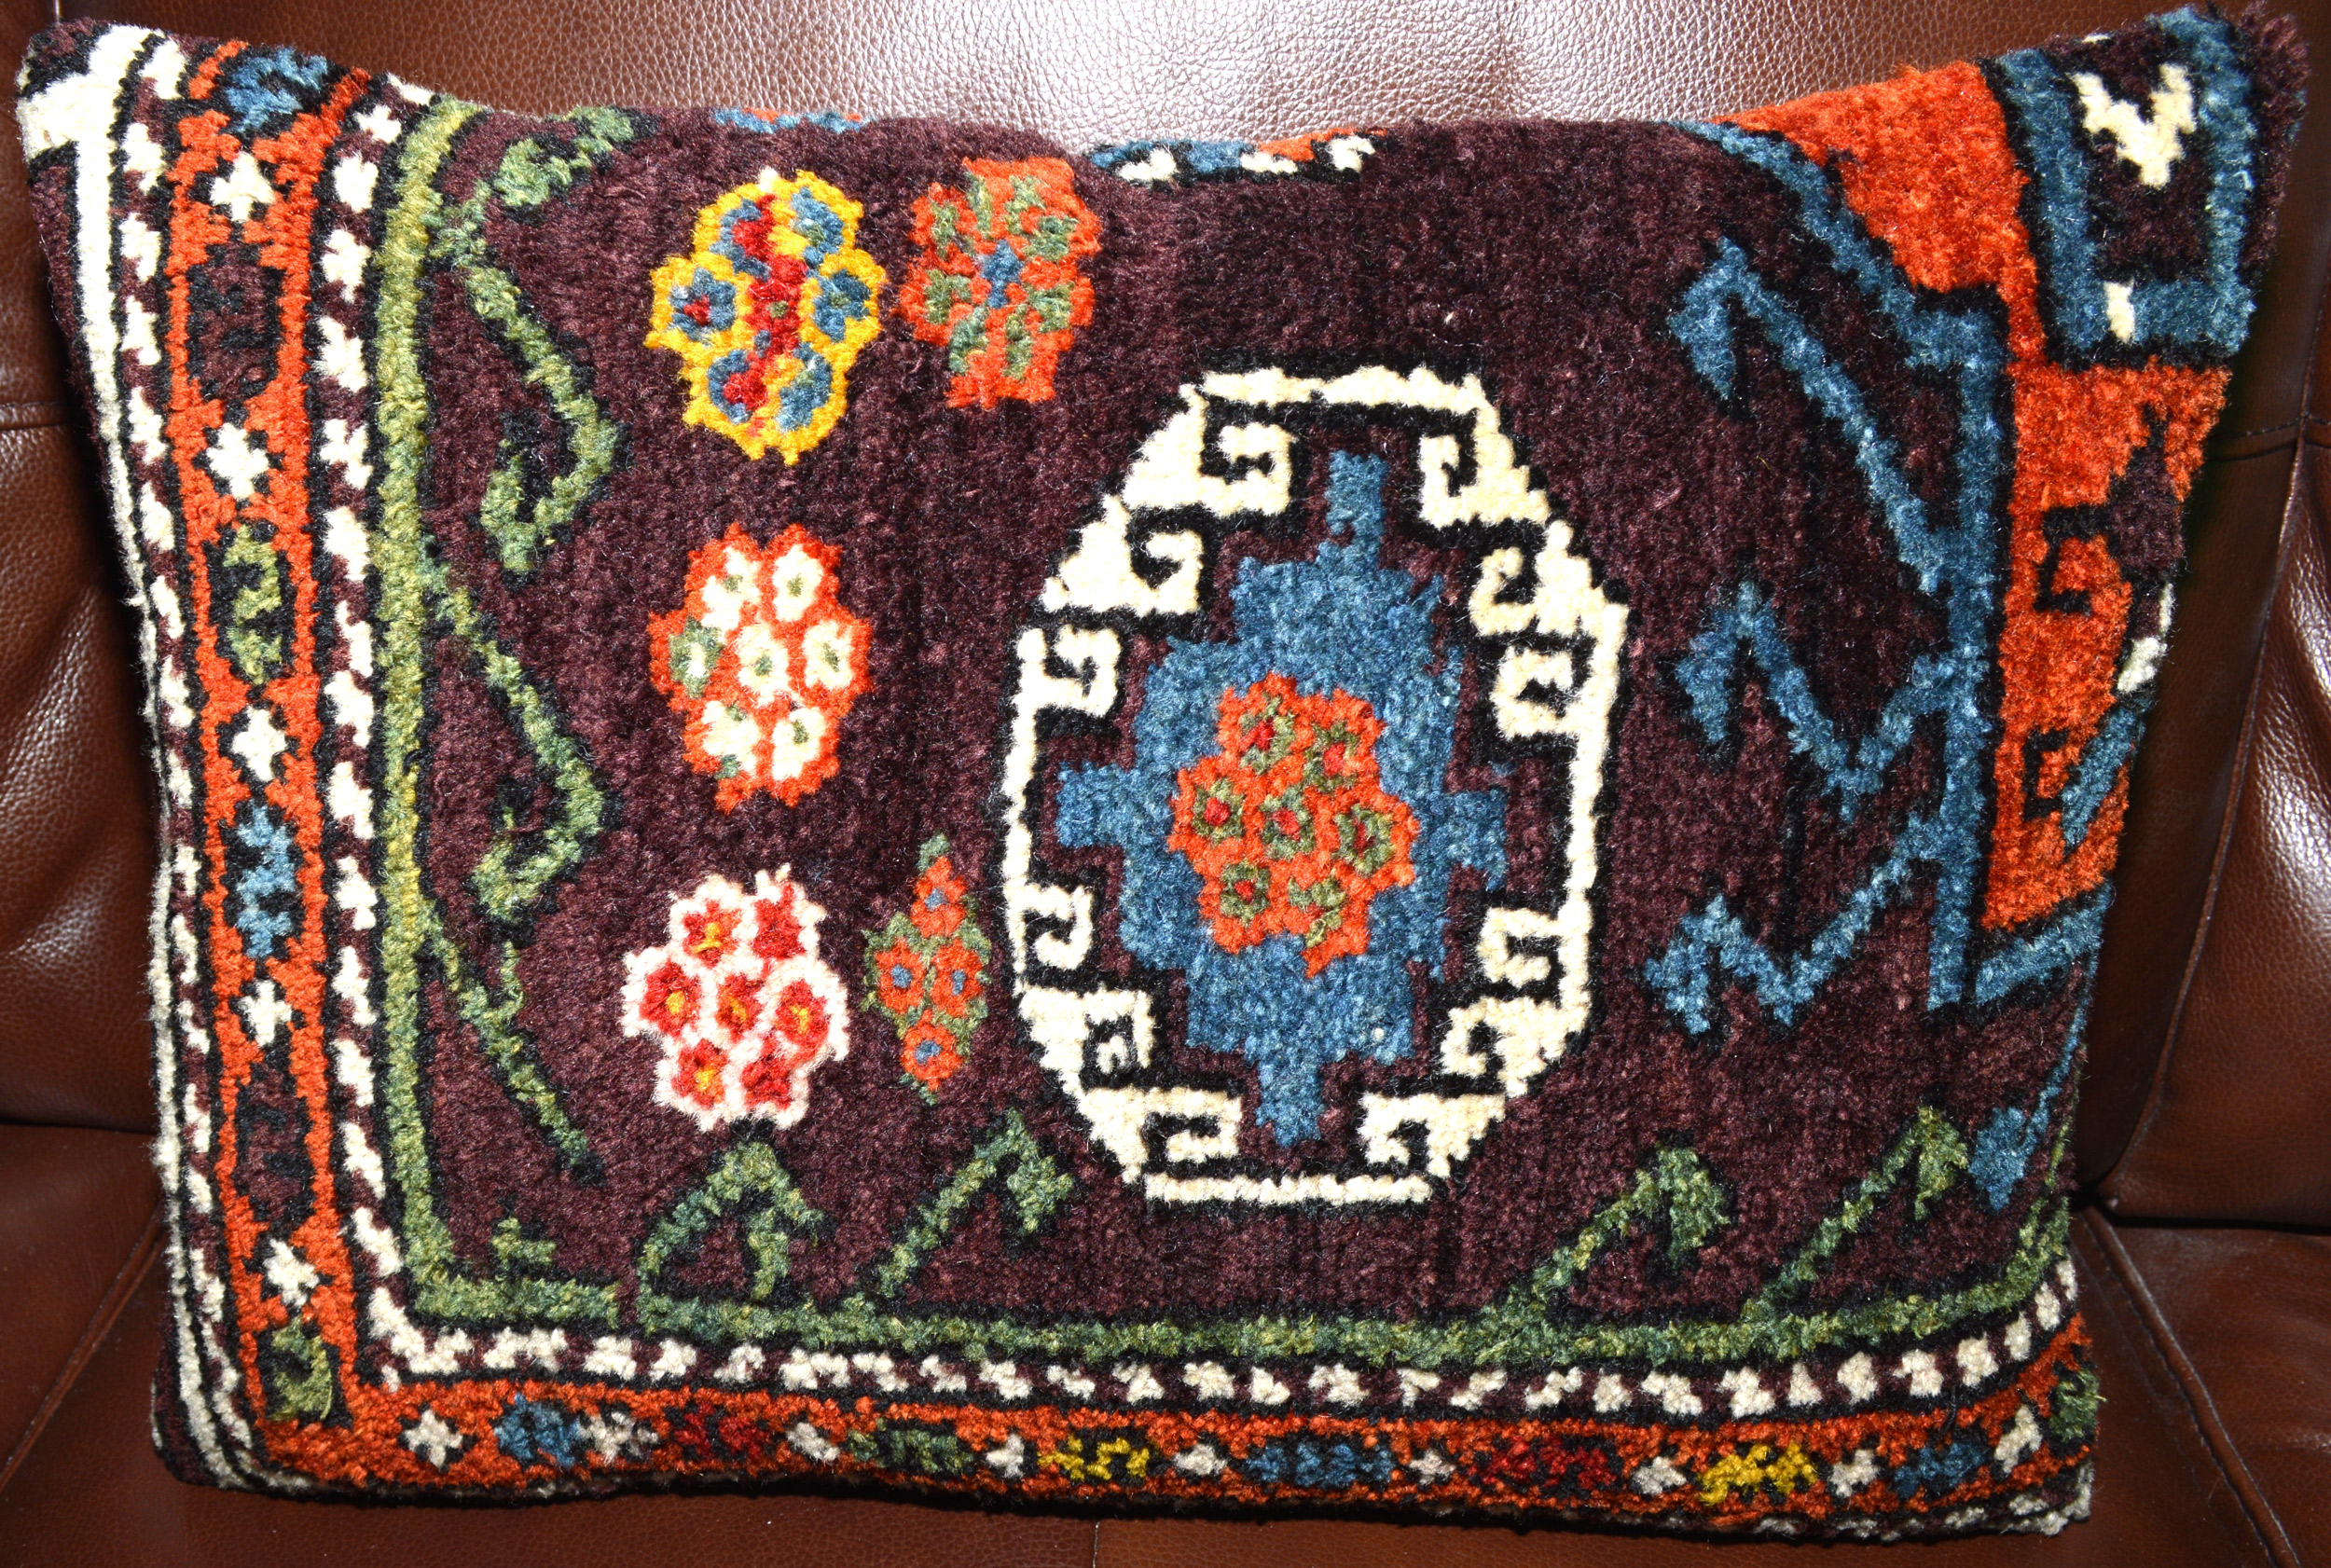 Antique Turkish rug fragment pillow with aubergine color field and Memling gel design, Douglas Stock Gallery, antique Oriental rugs, carpets, pillows Boston,MA area New England